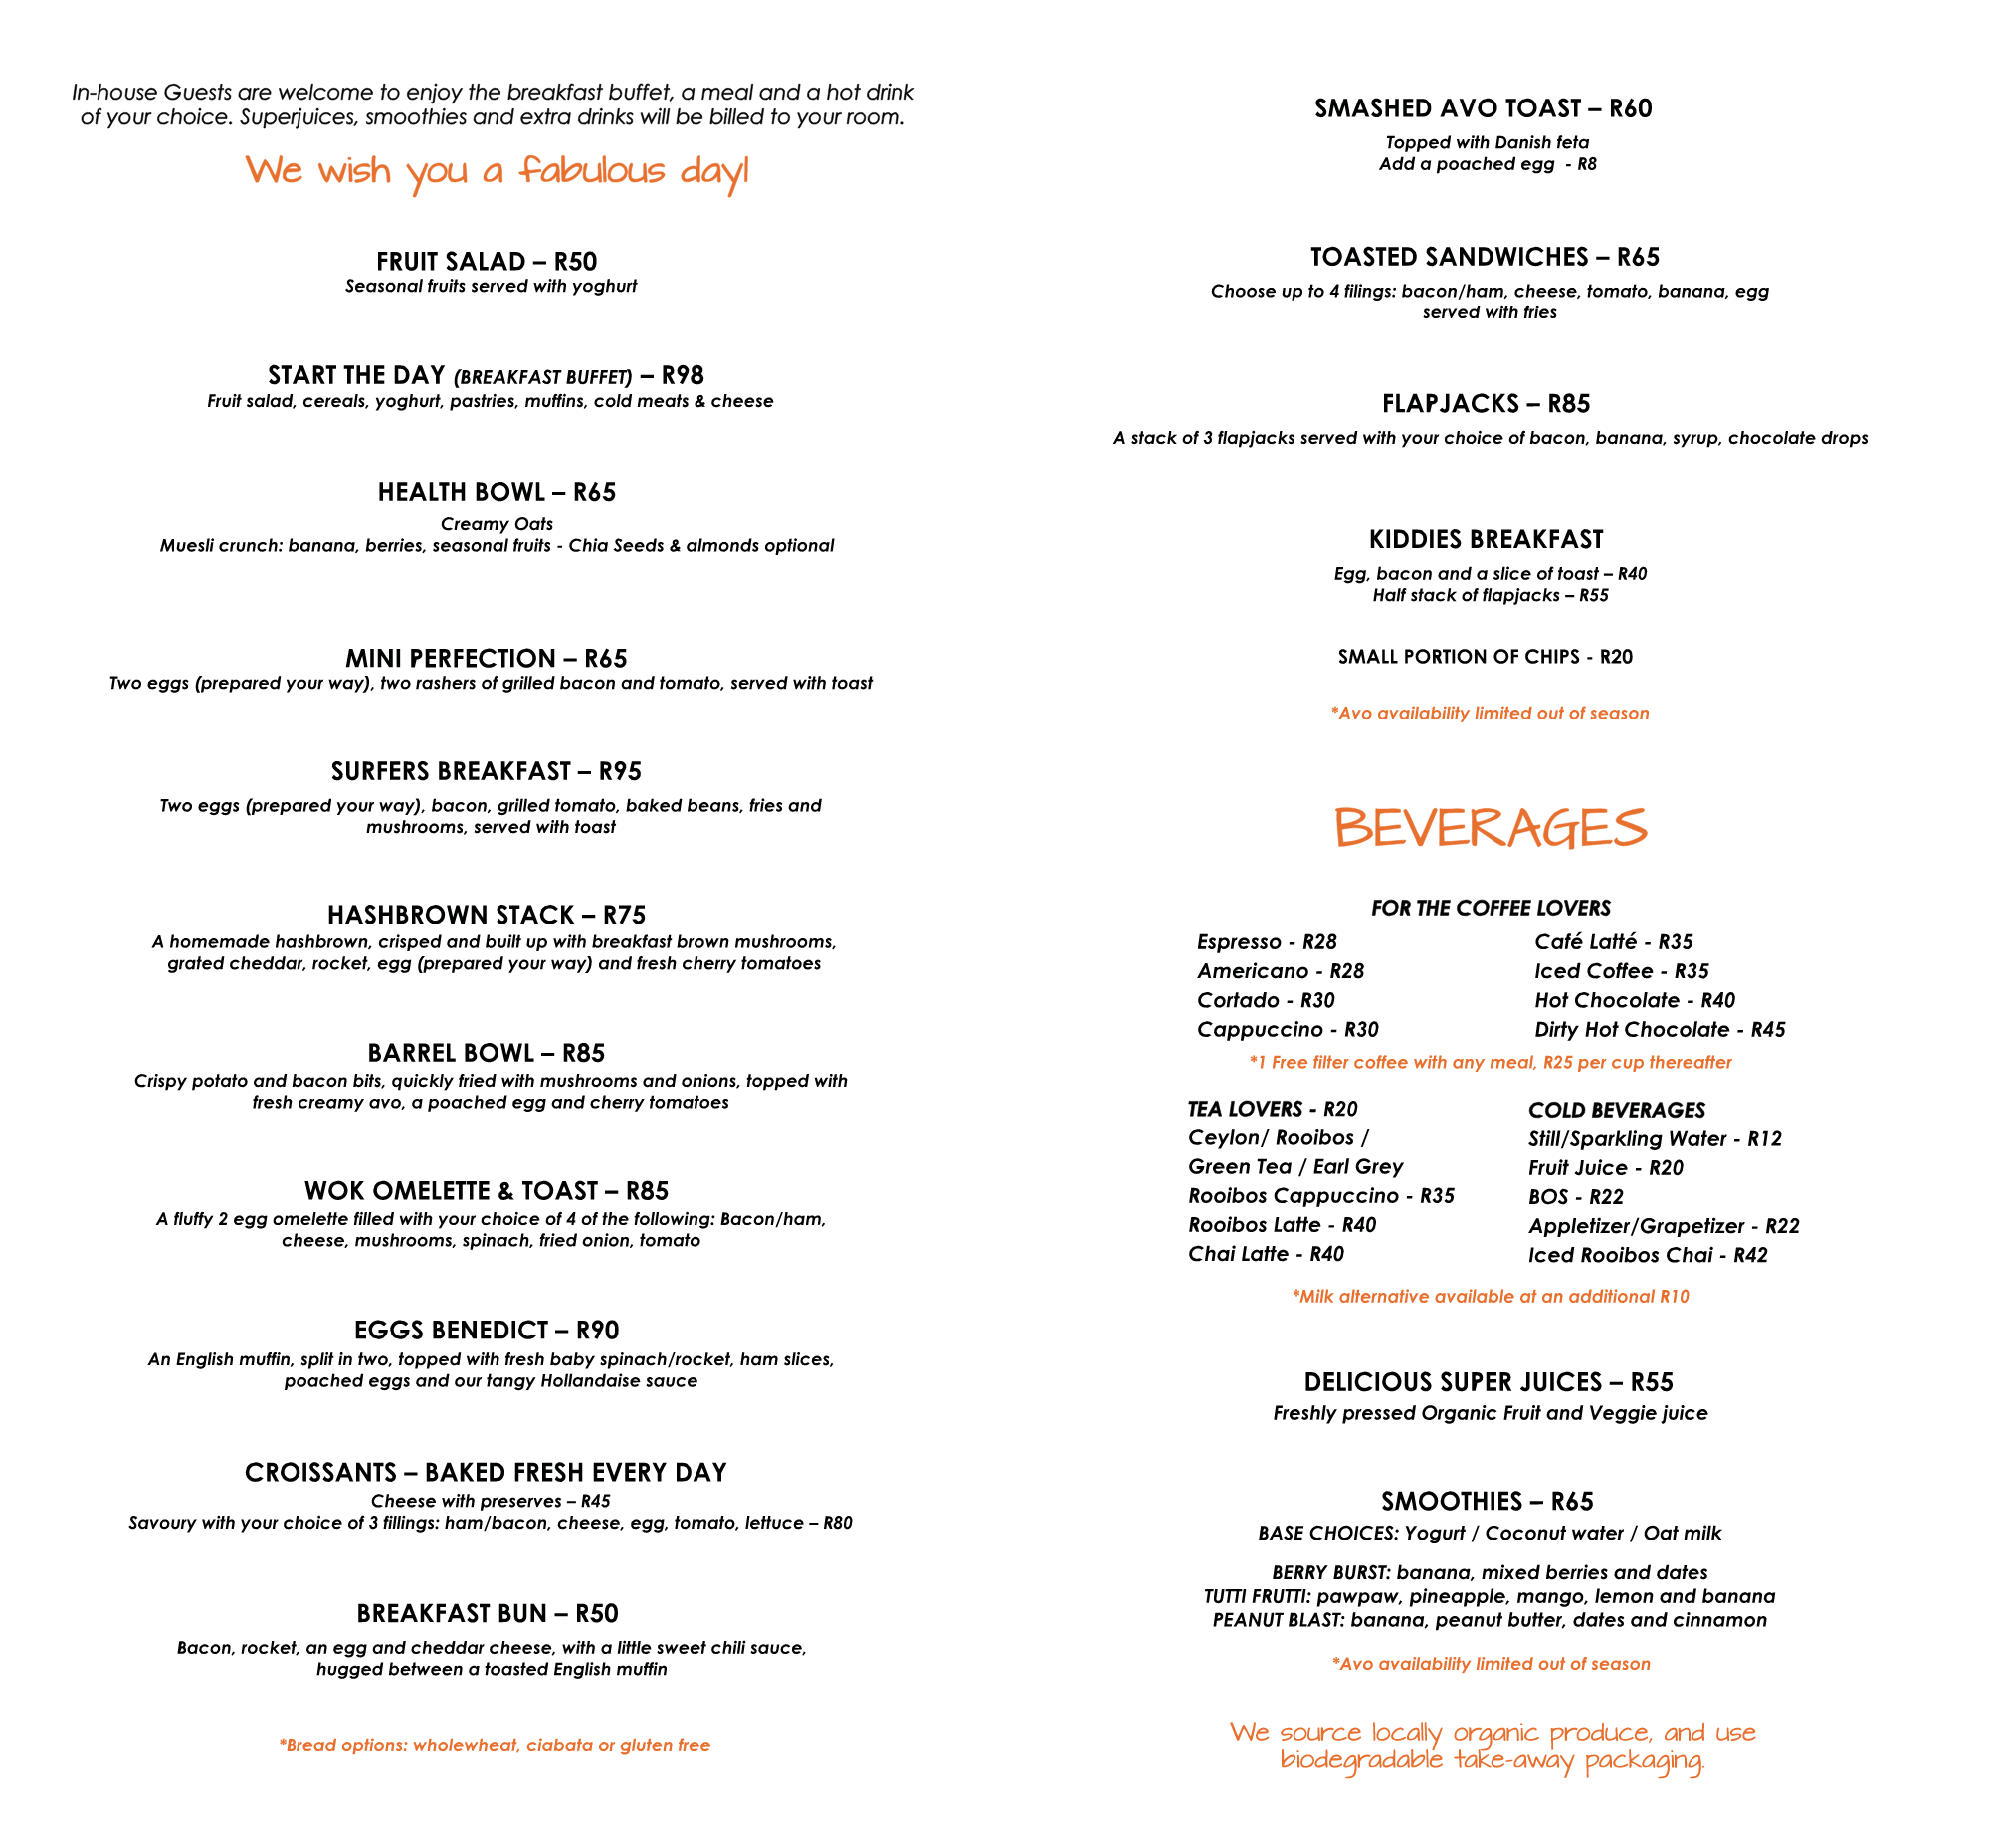 Menu options and prices